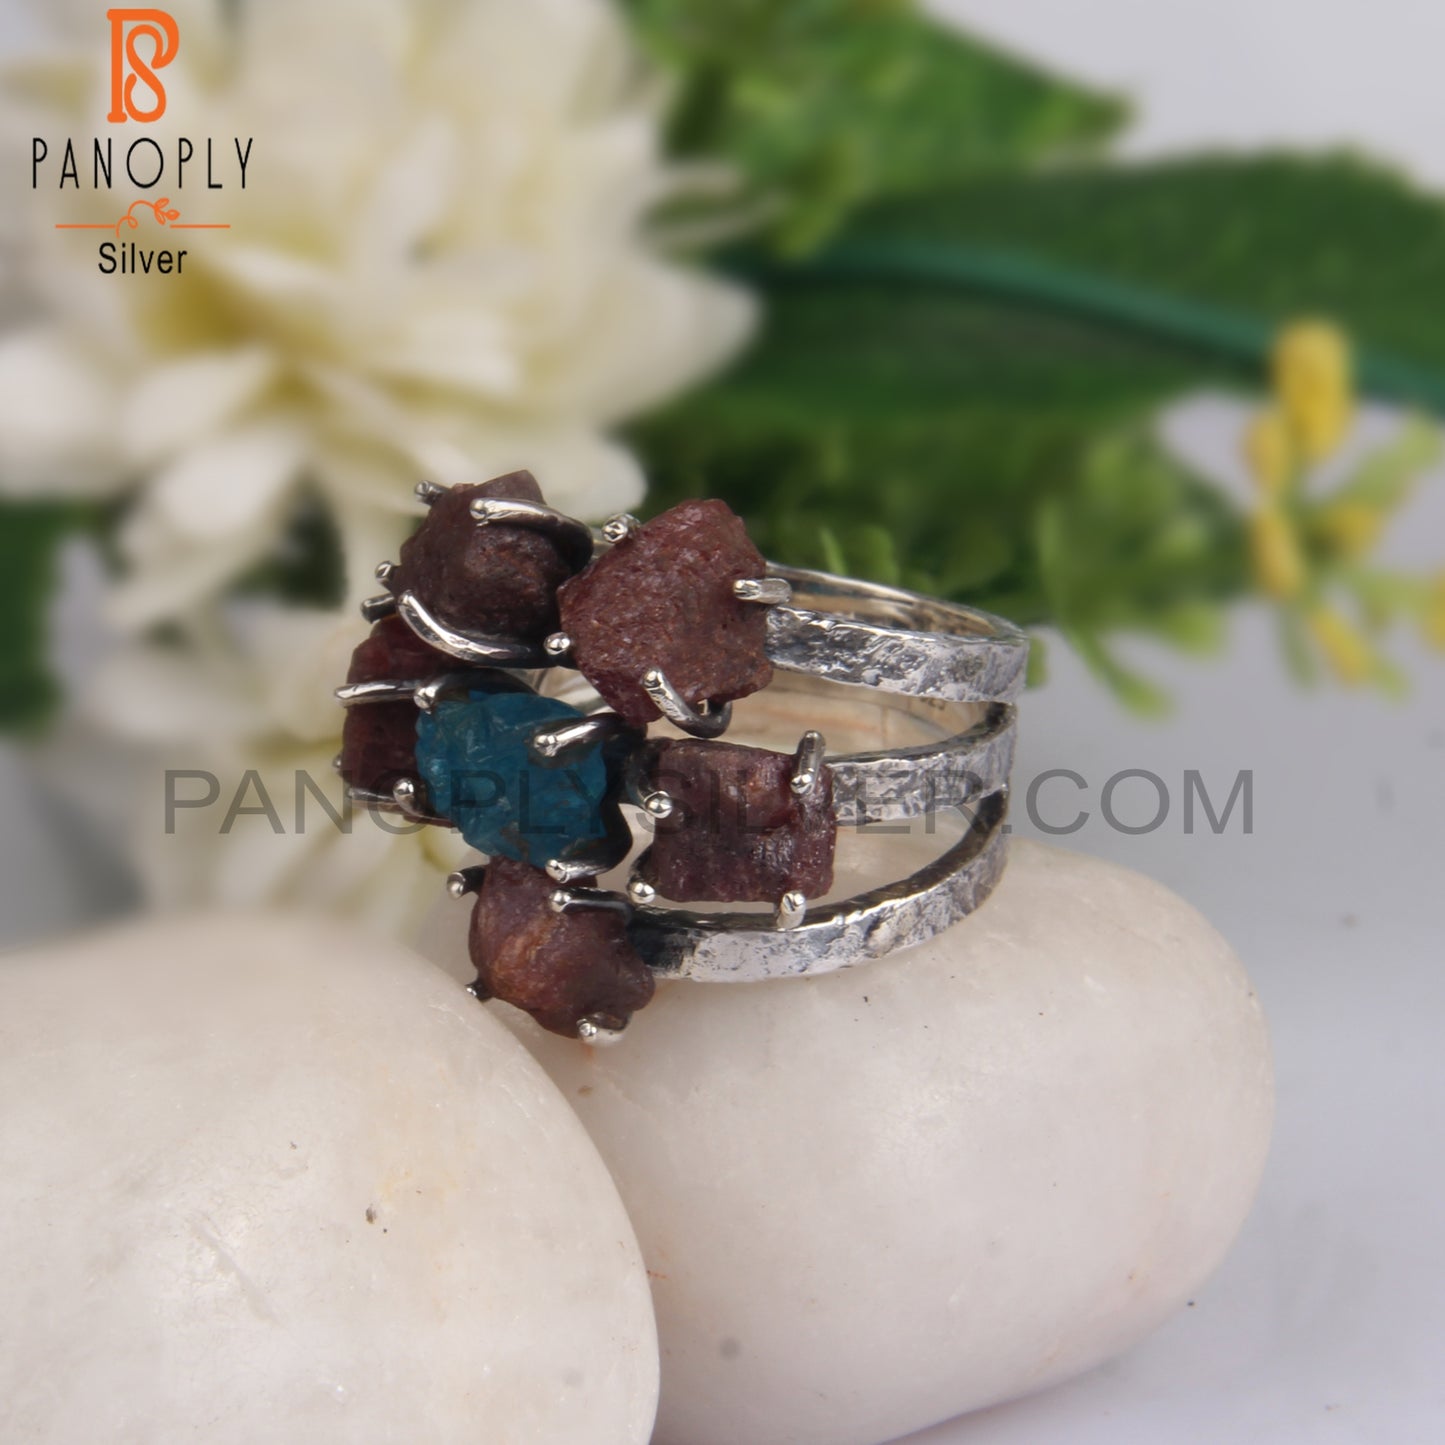 Neon Apatite & Ruby Rough 925 Sterling Silver Ring